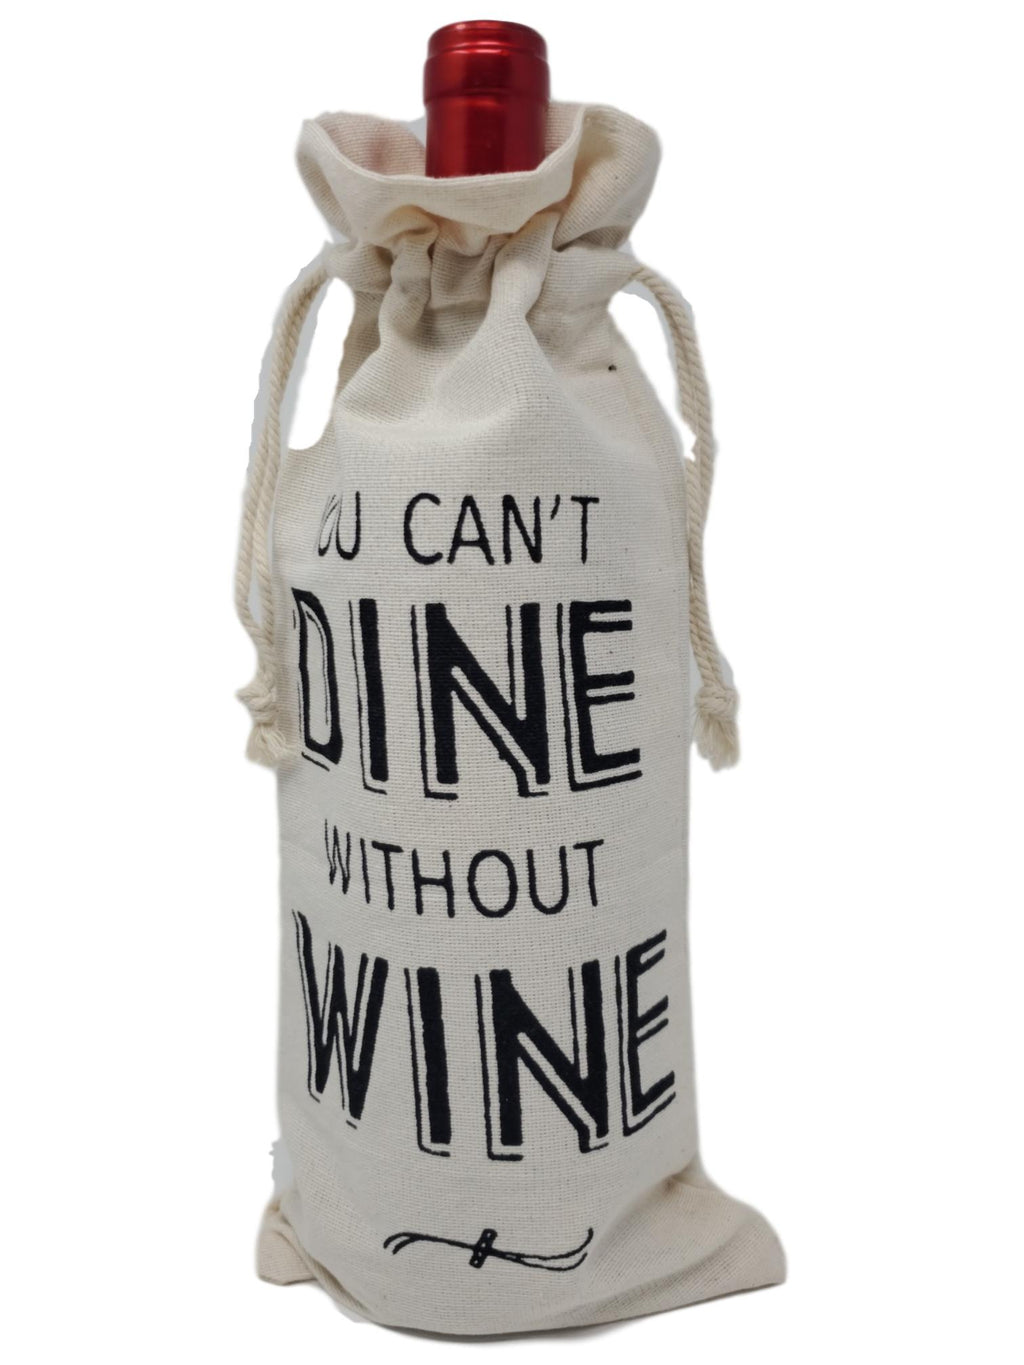 Cotton Canvas Wine Gift Bags “You Can't Dine Without Wine” – Set of 2